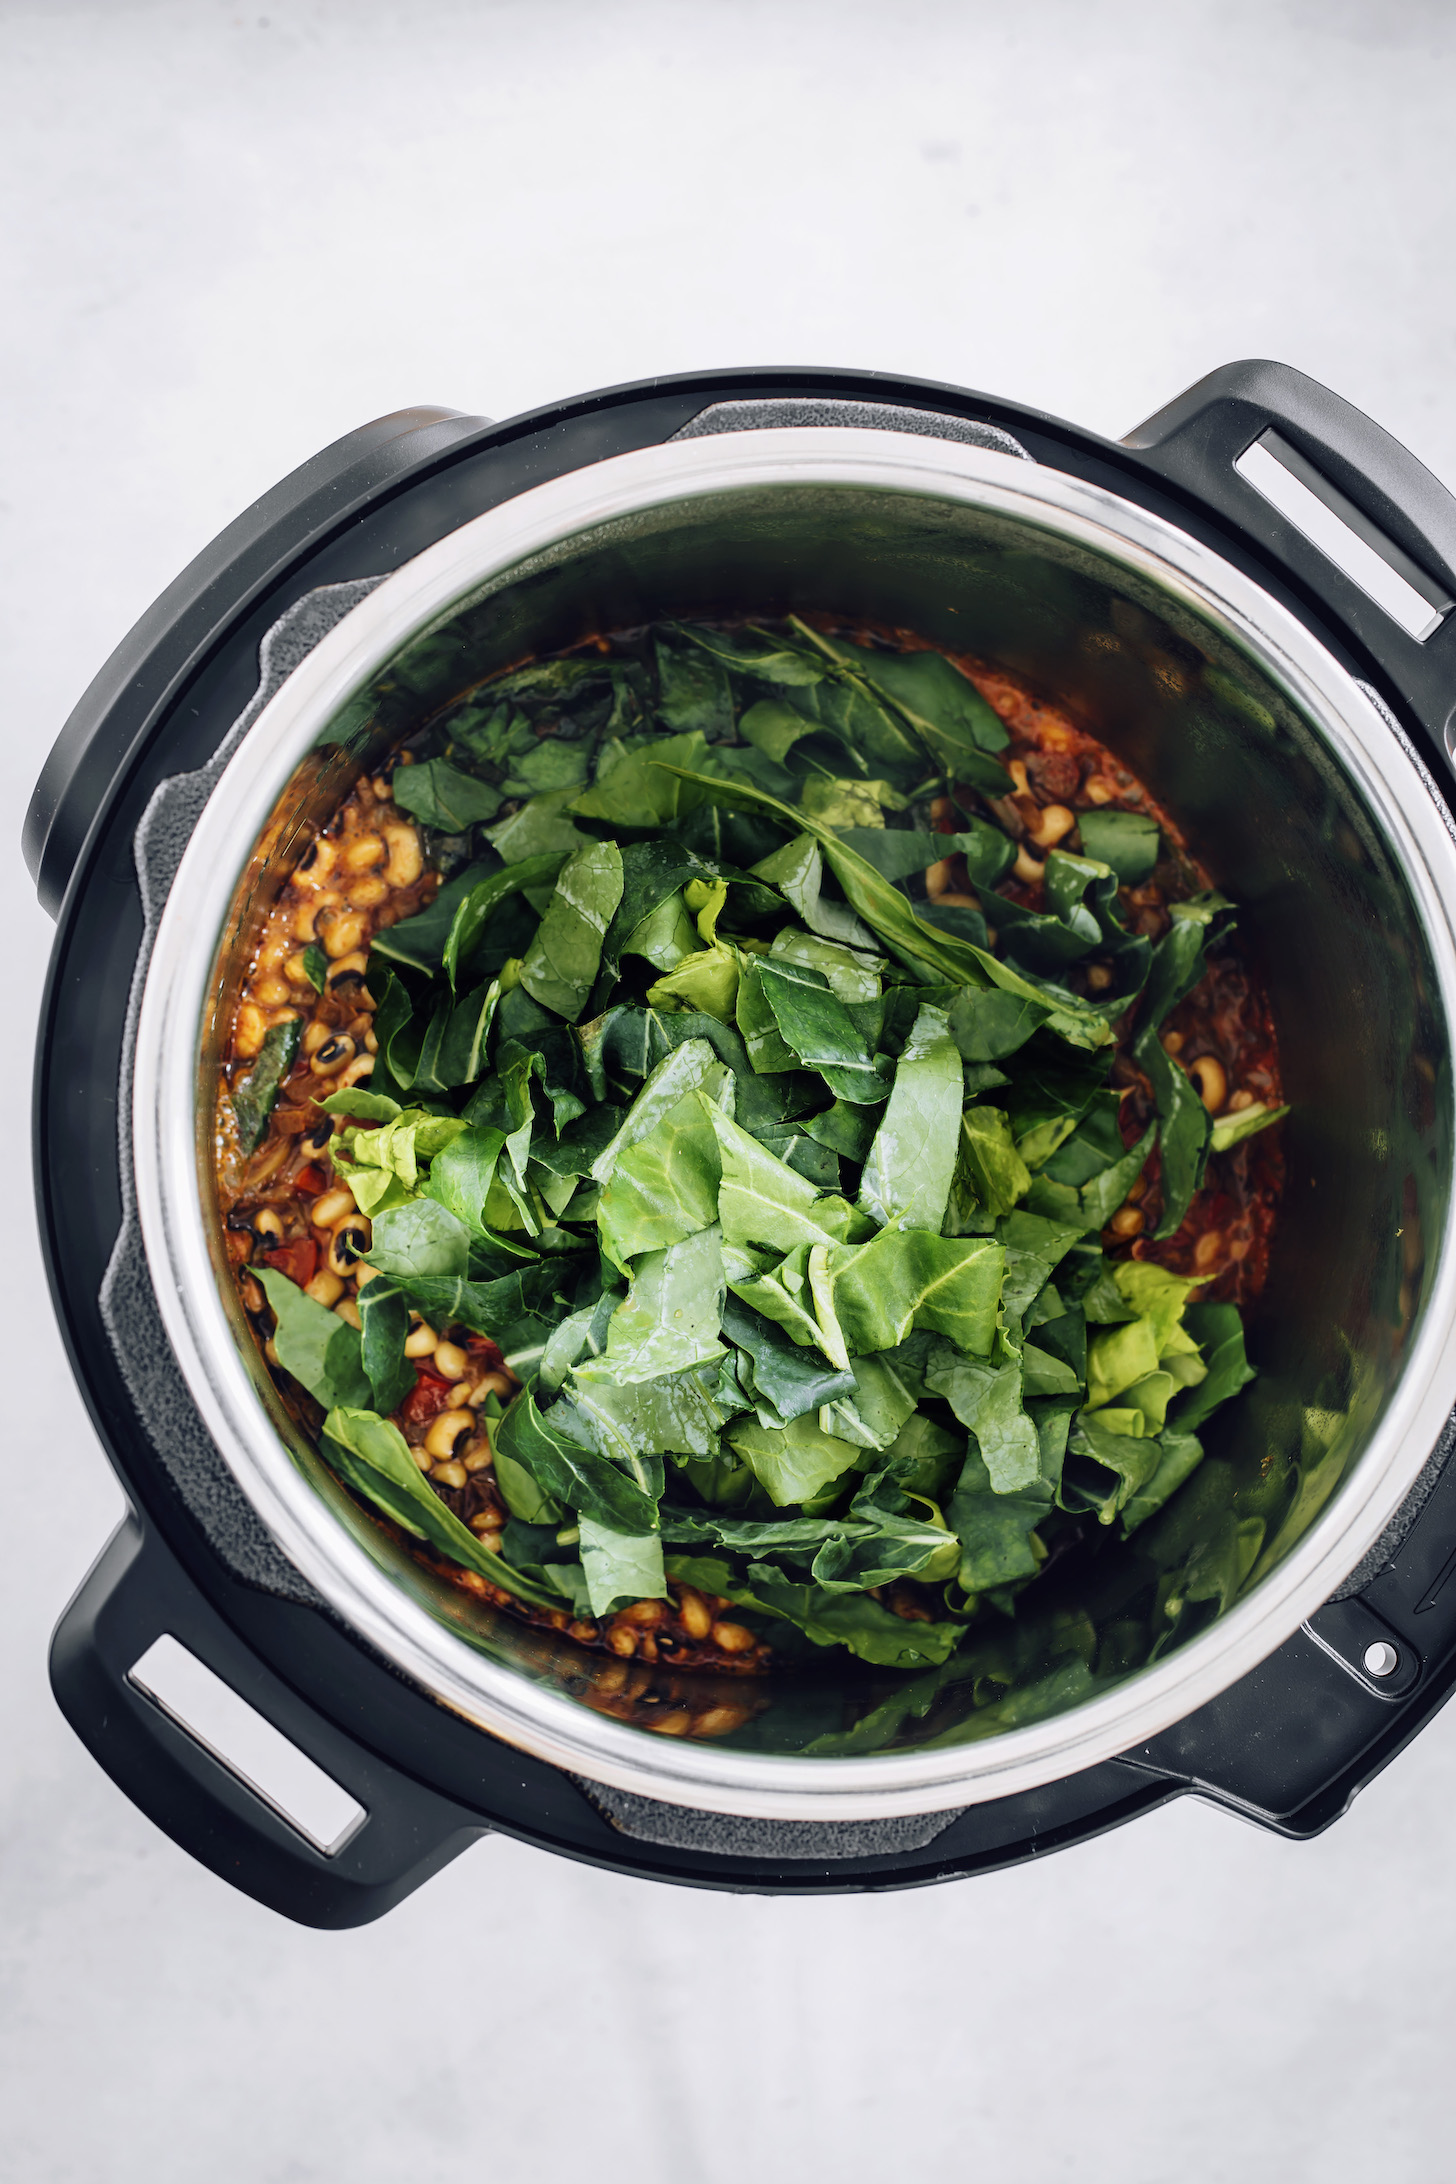 Chopped collard greens in an Instant Pot over seasoned black eyed peas